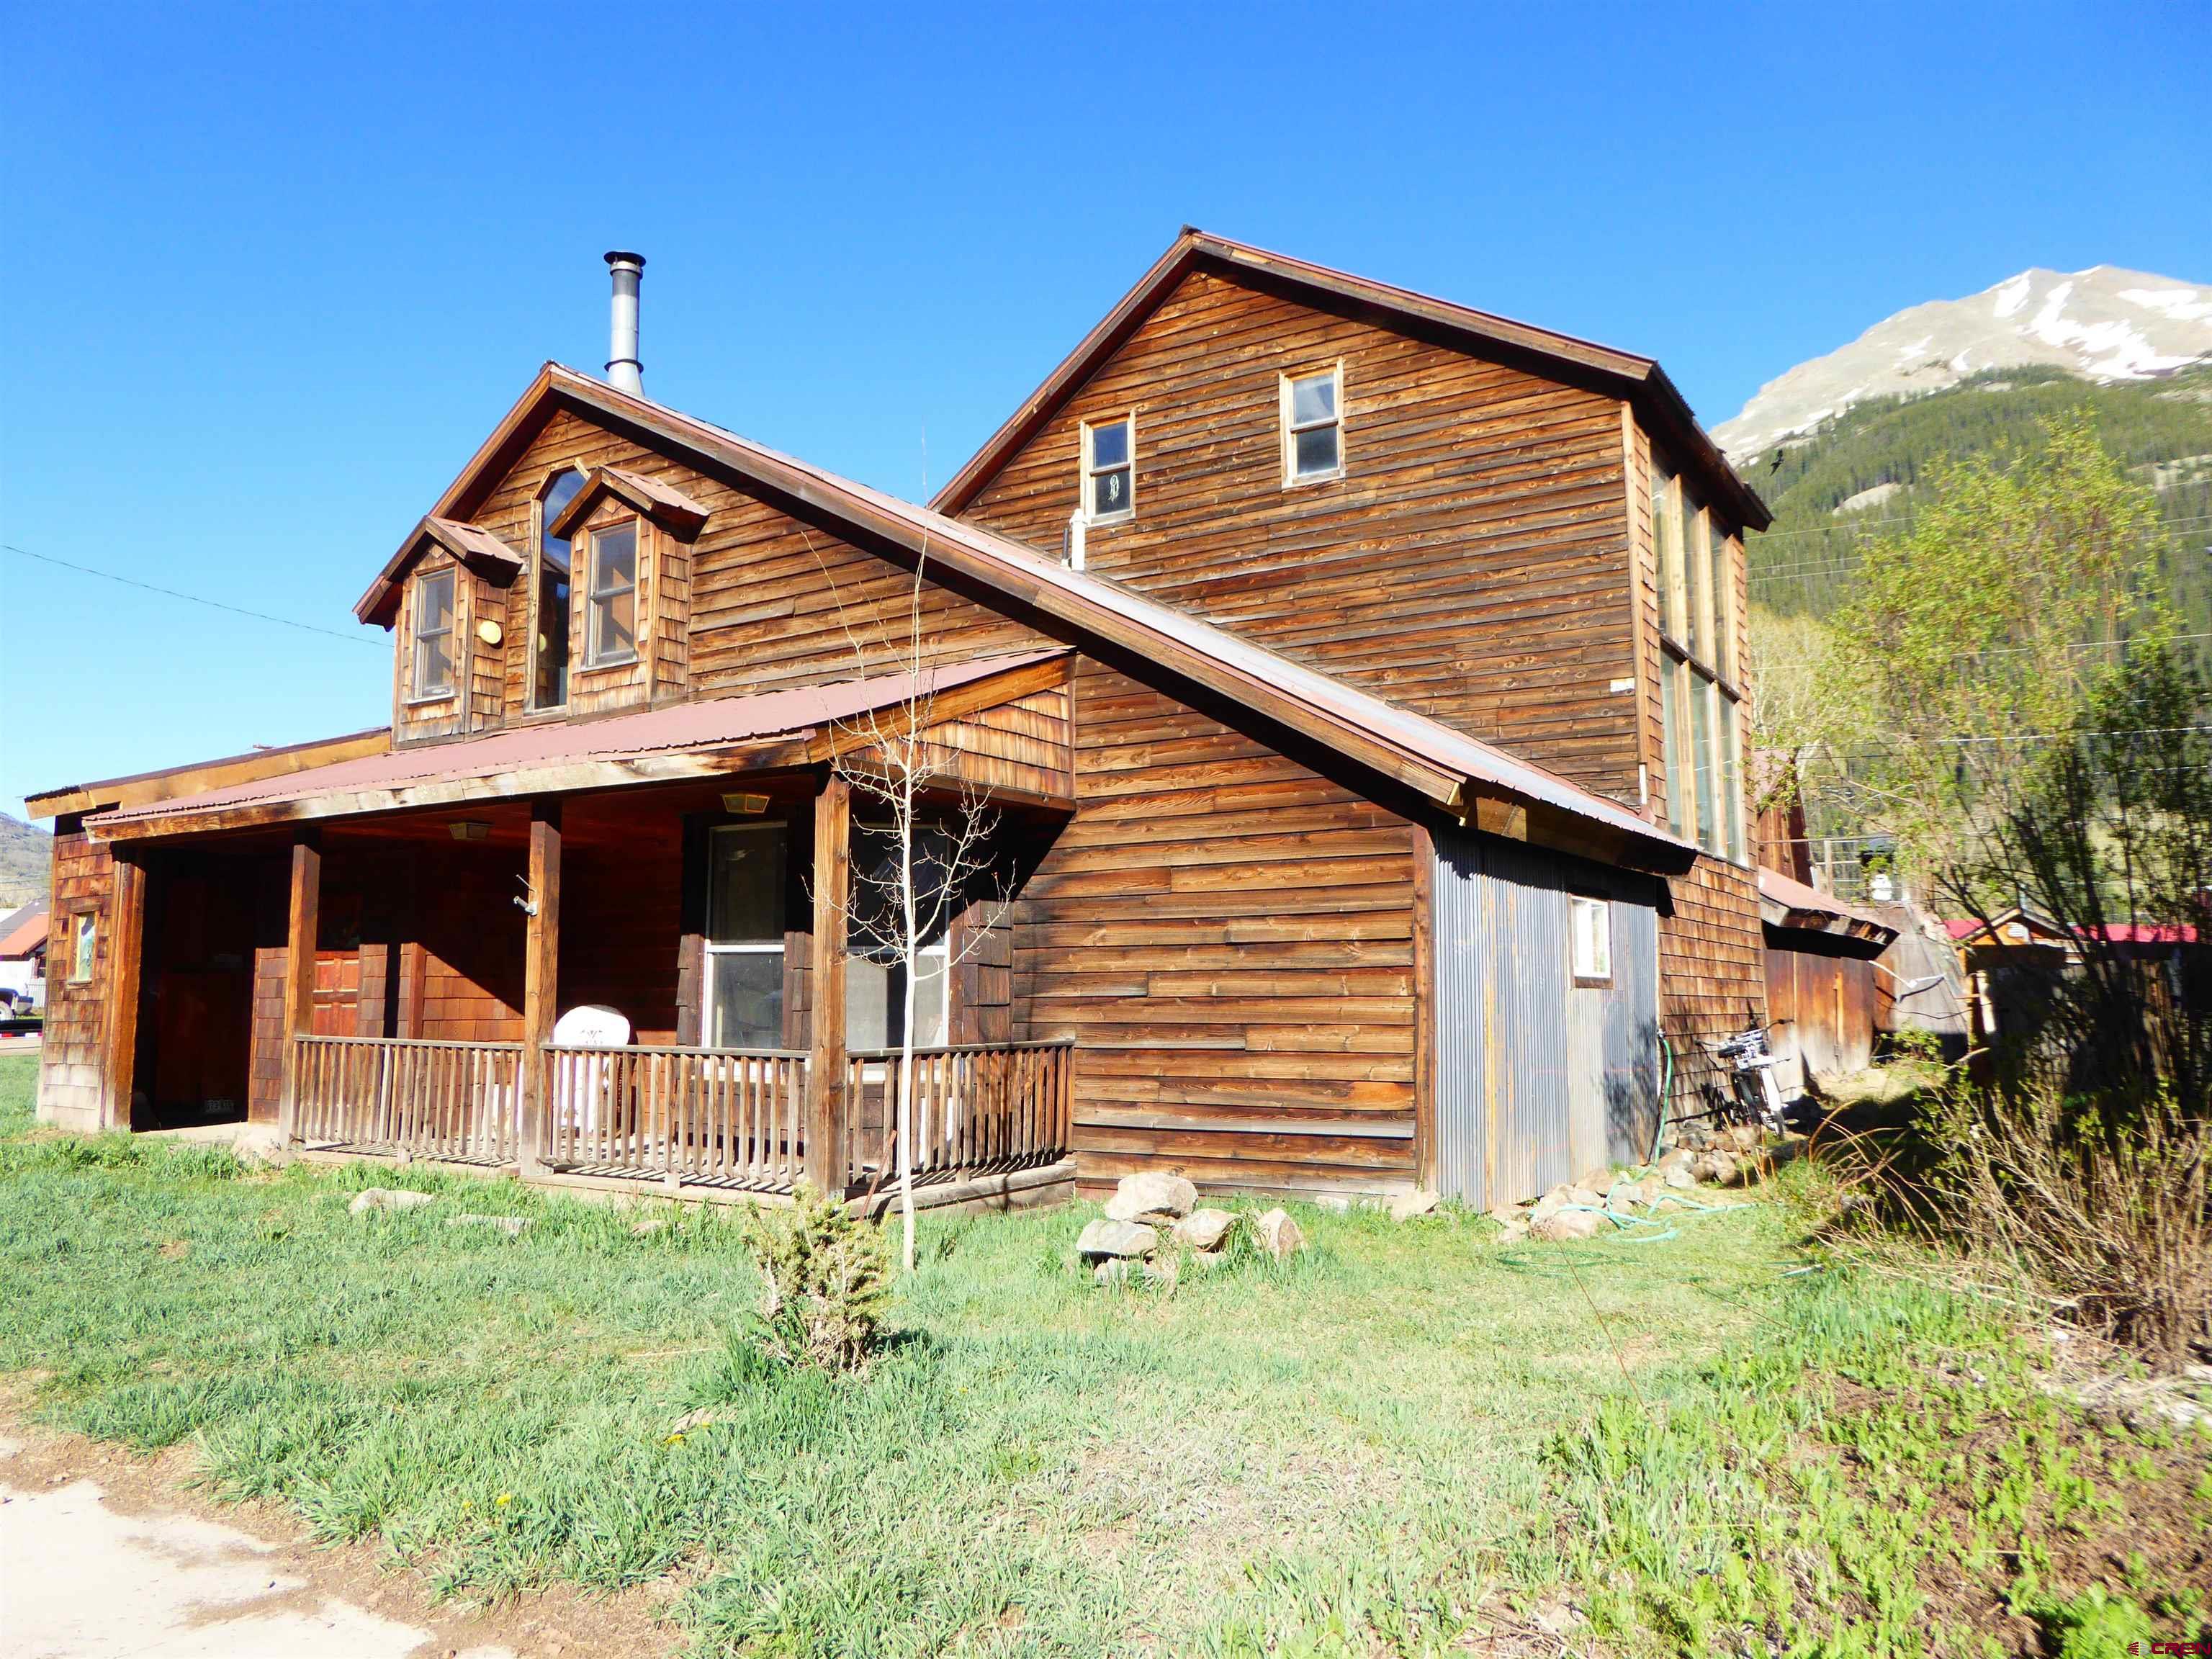 Photo of 858 Reese St in Silverton, CO